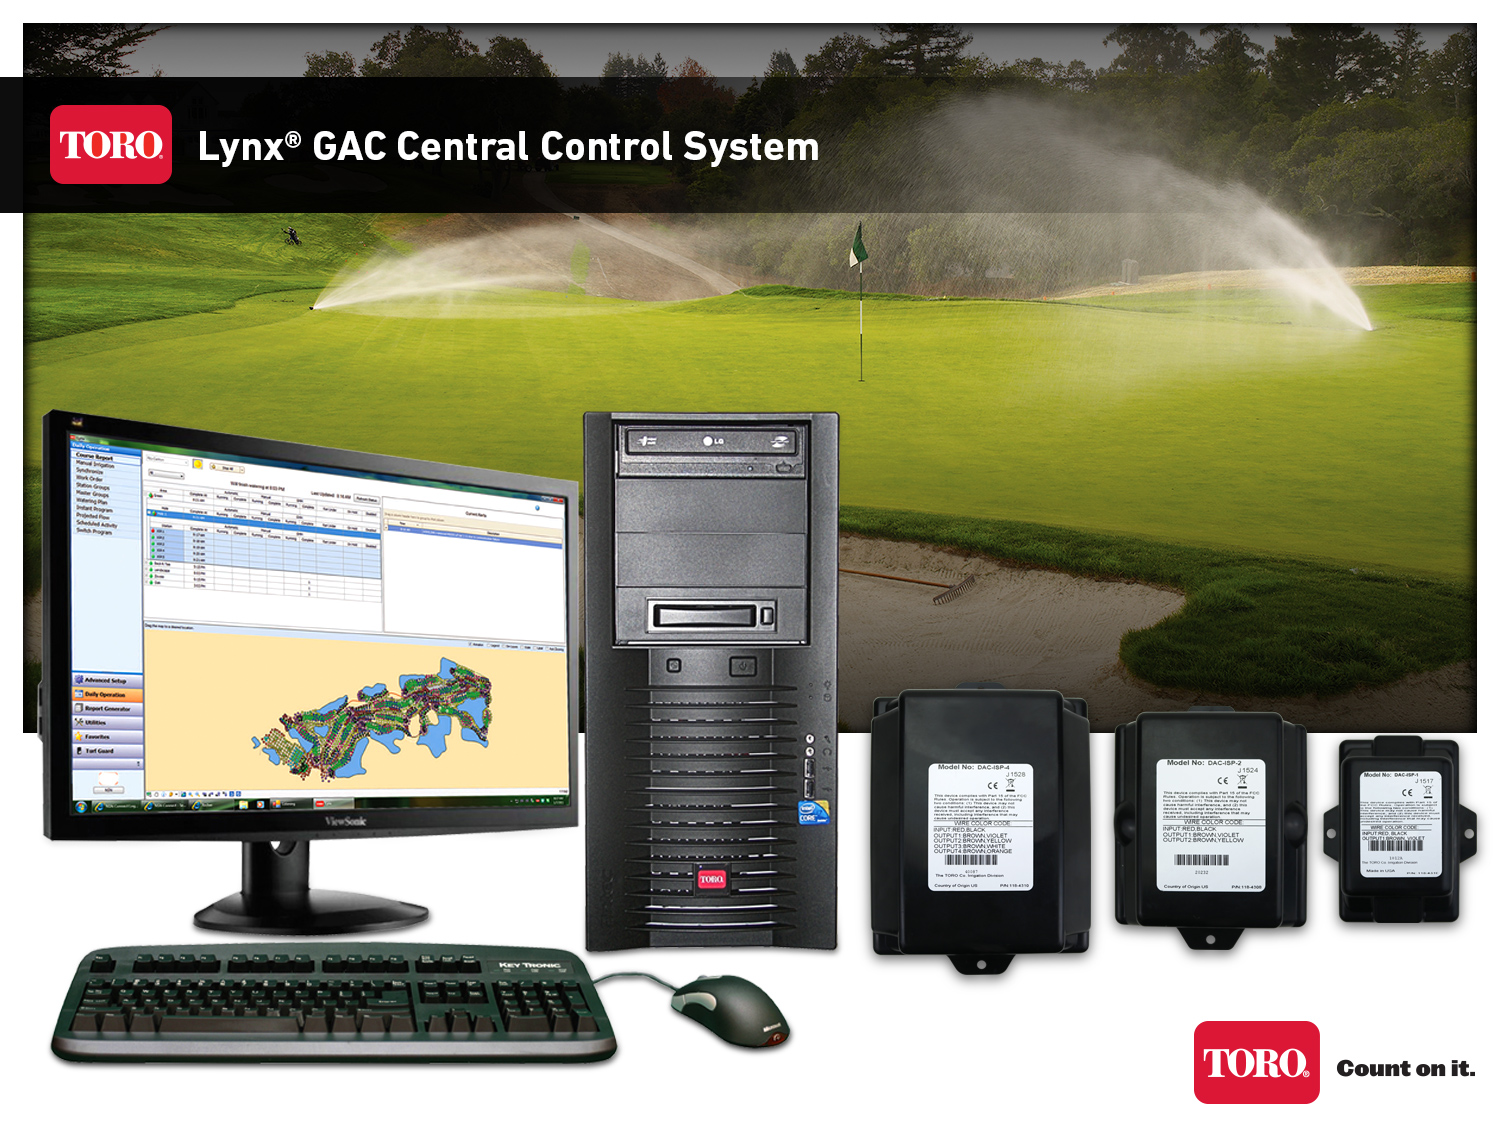 Easily upgrade older decoder systems with Toro Lynx® GAC